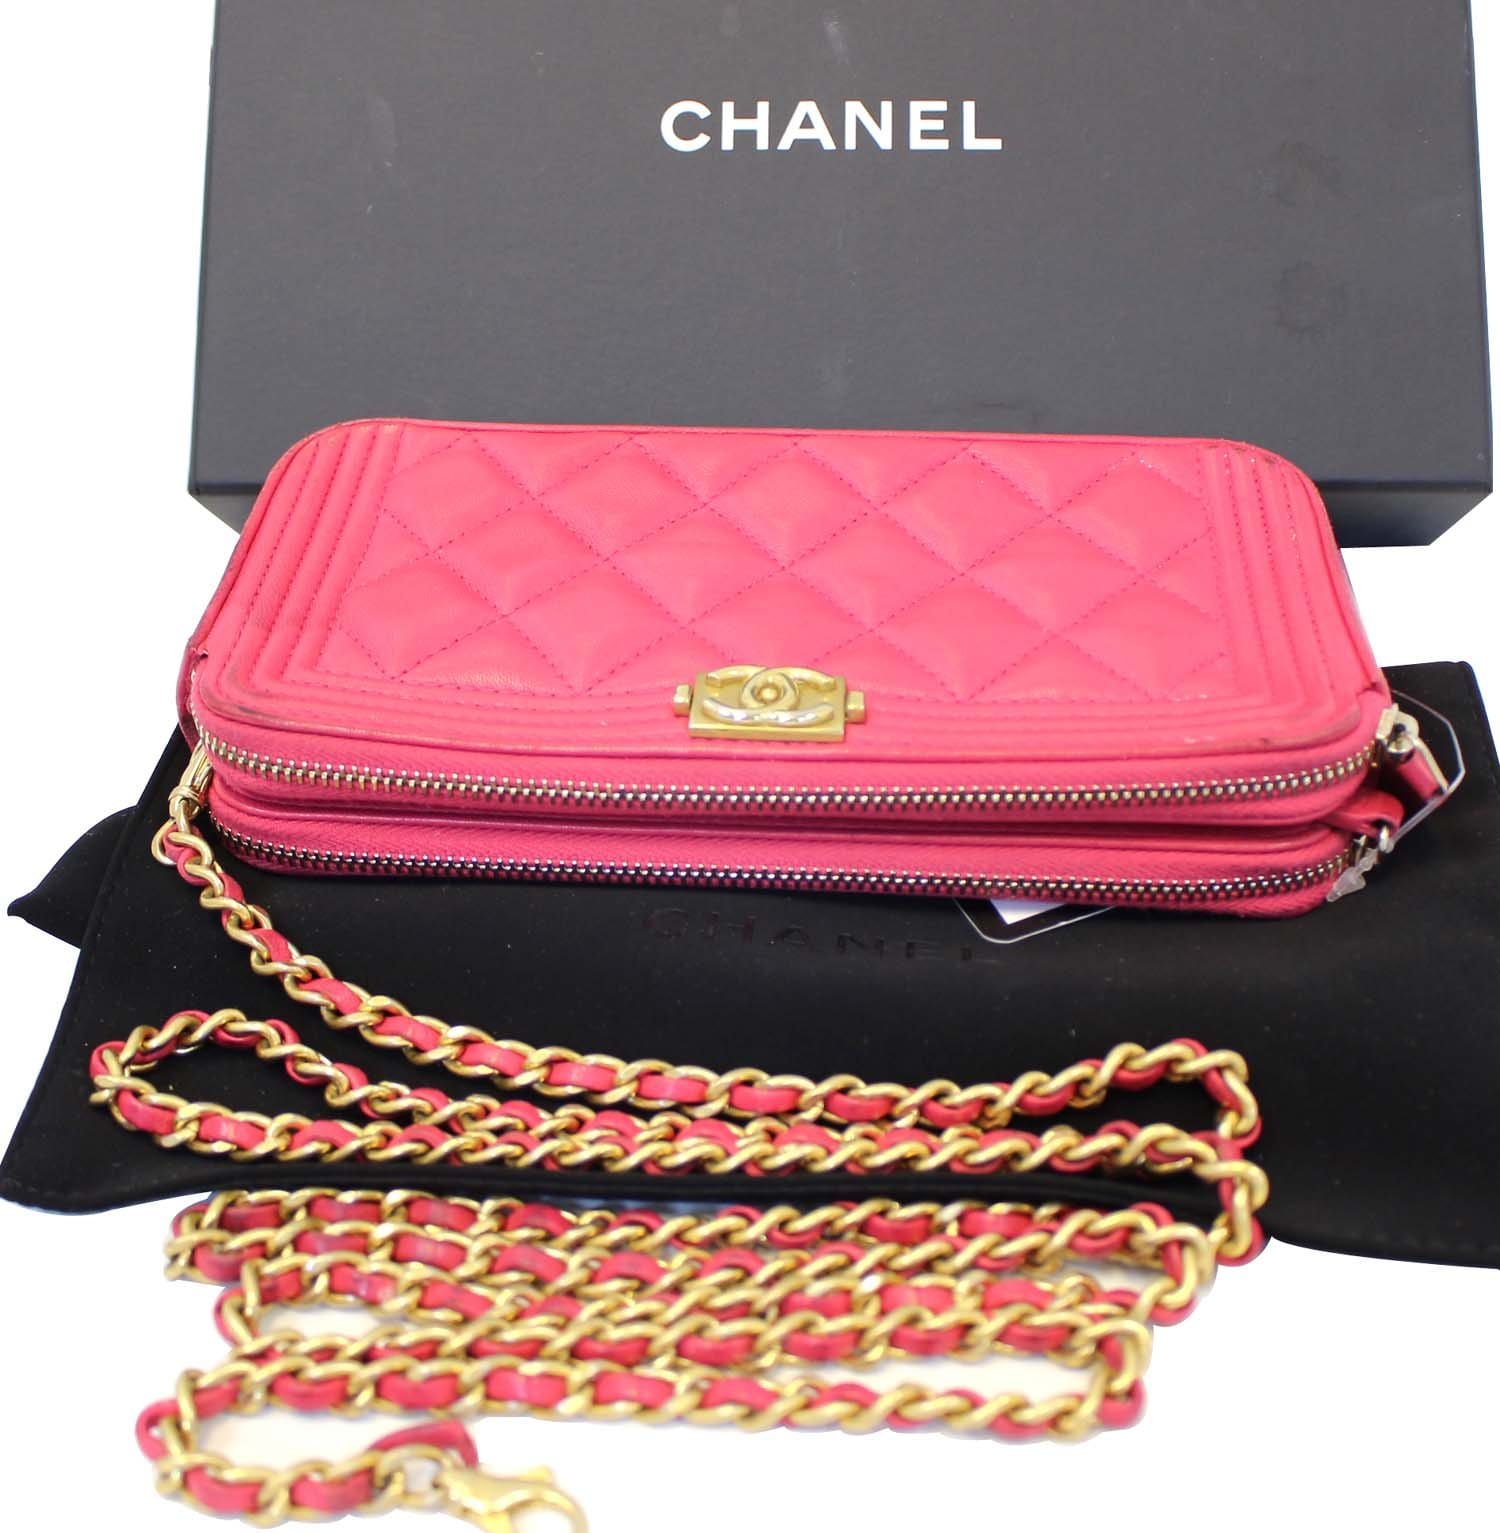 DUPE for Chanel WOC, Chanel bag dupe for WOC wallet on chain 🖤  vm.tiktok.com/V3sjrN/ ‪ Follow me on TikTok @nikkiimania‬ #contentstrategy  #socialmedia, By Nikkimania